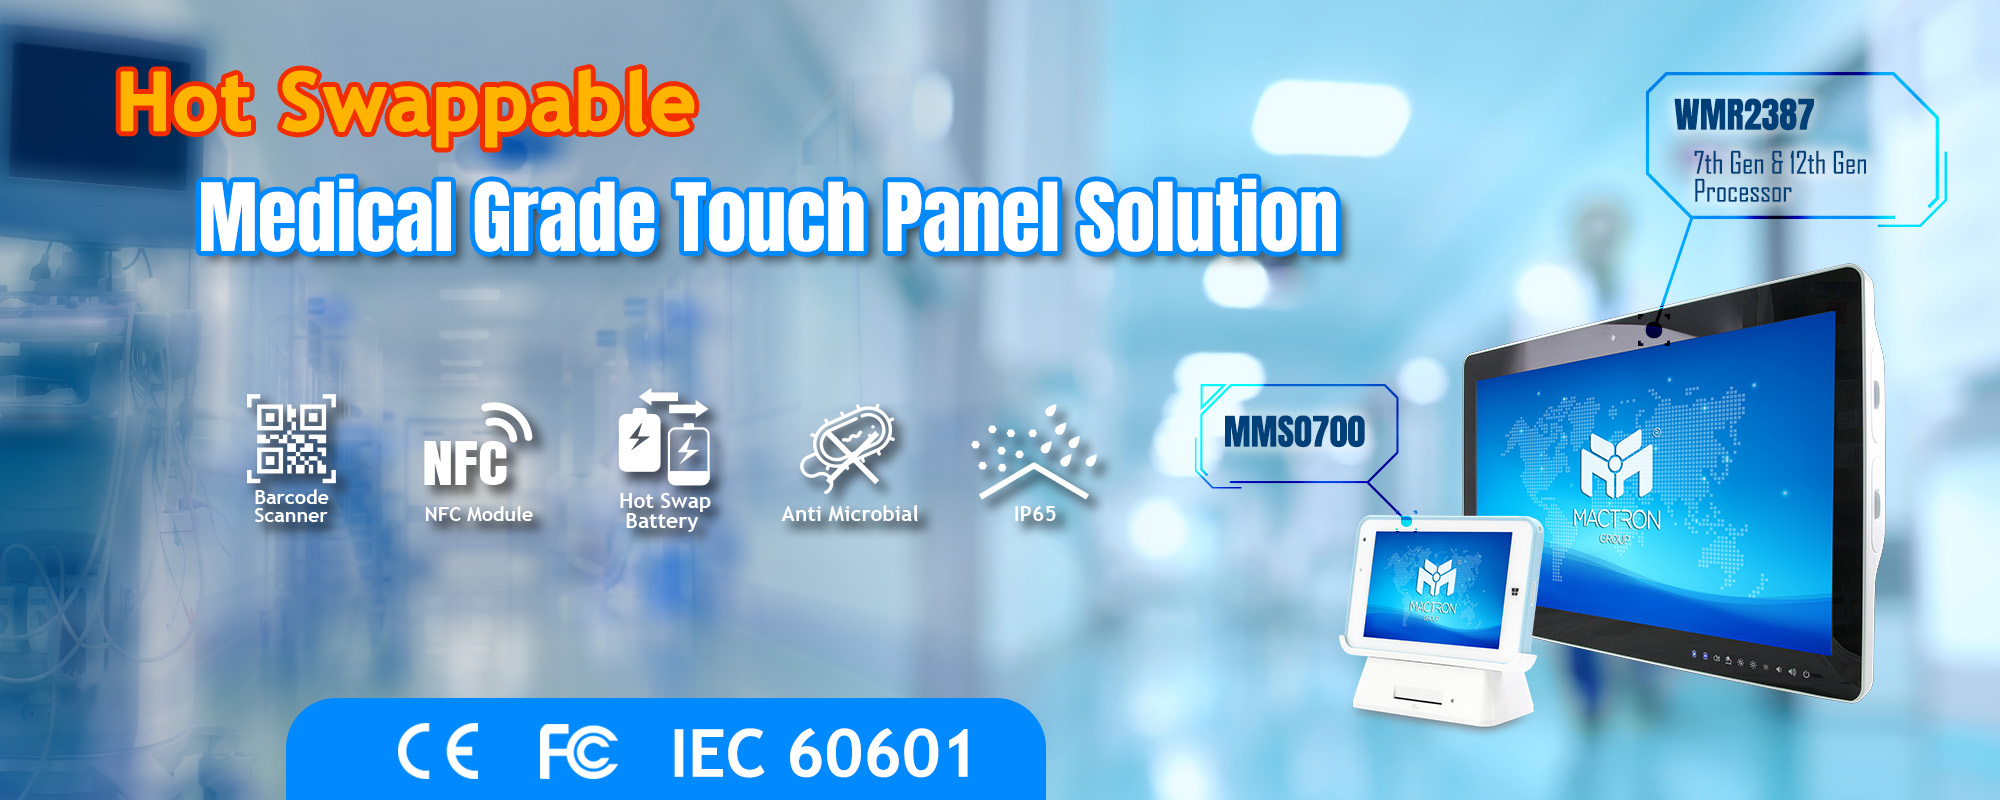 Hot Swappable Medical Grade Touch Panel Solution